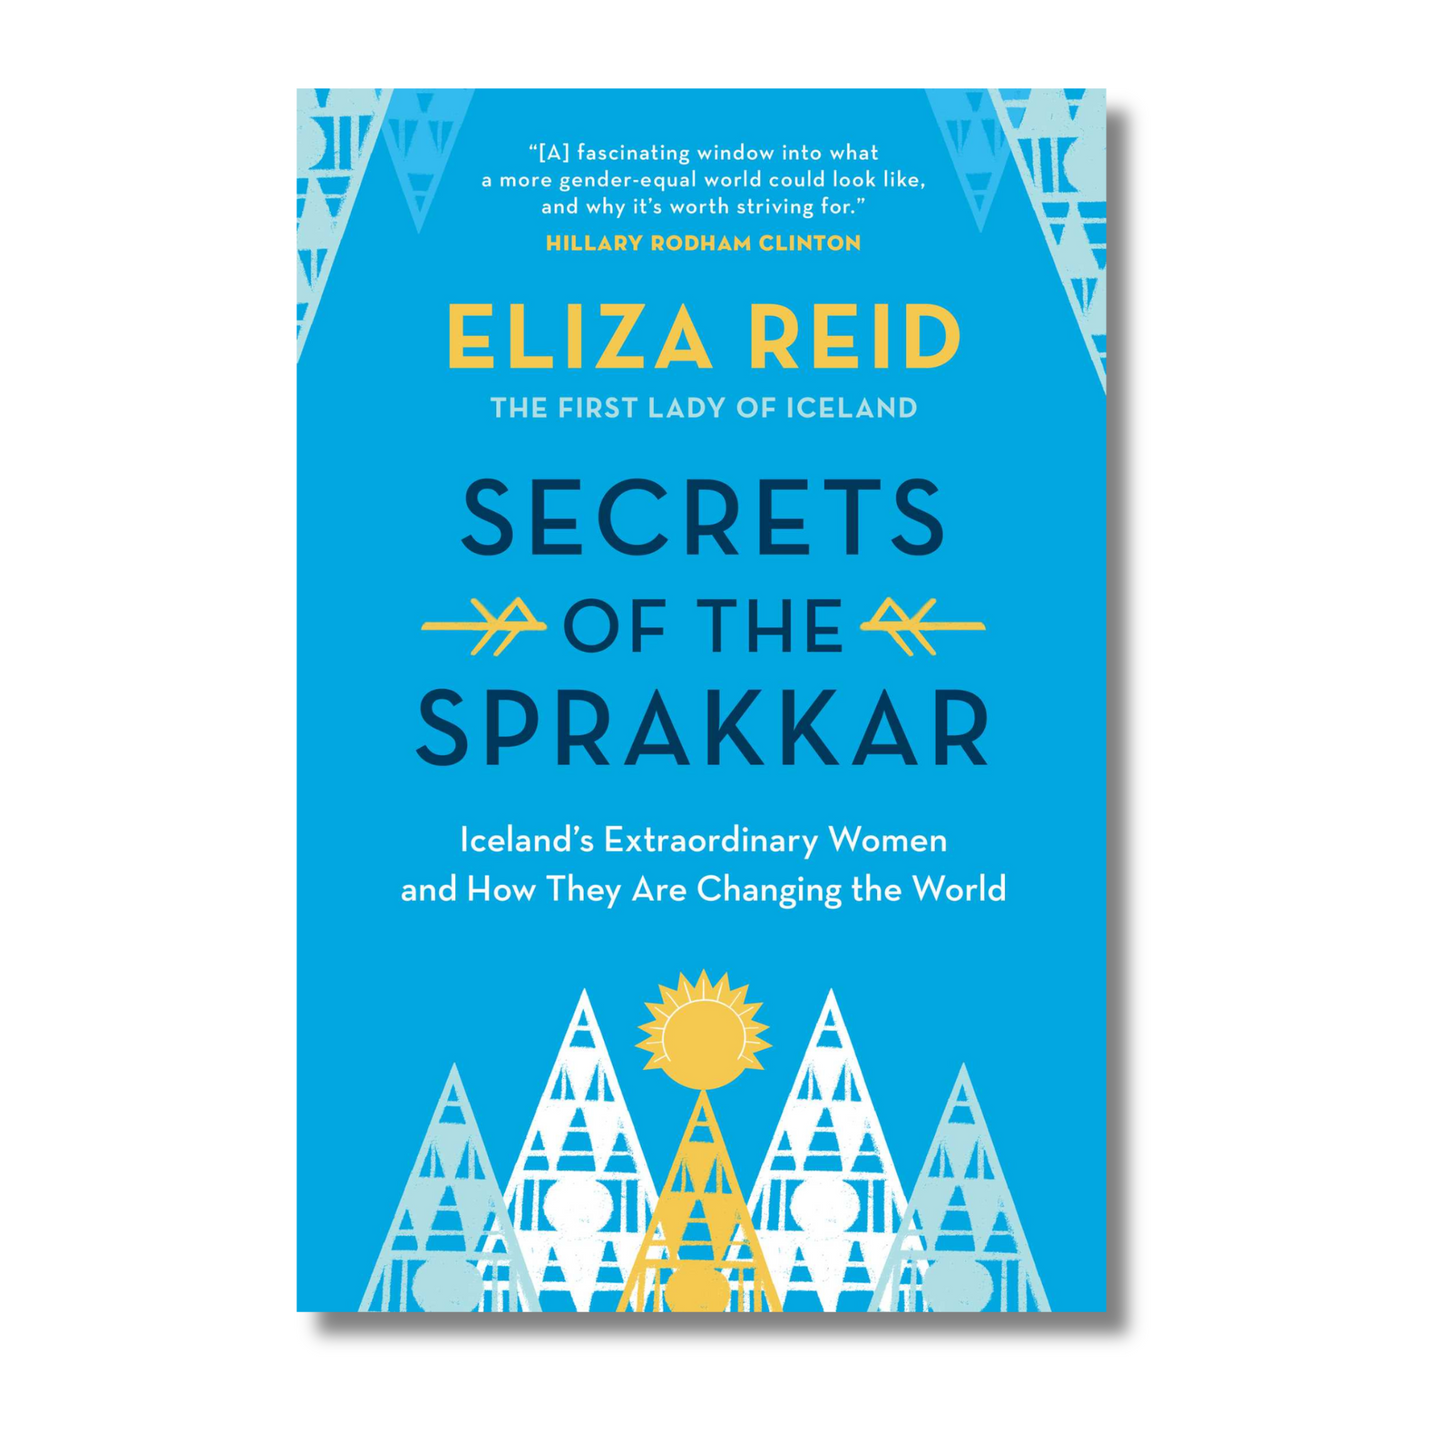 Secrets of the Sprakkar - Iceland's Extraordinary Women and How They Are Changing the World